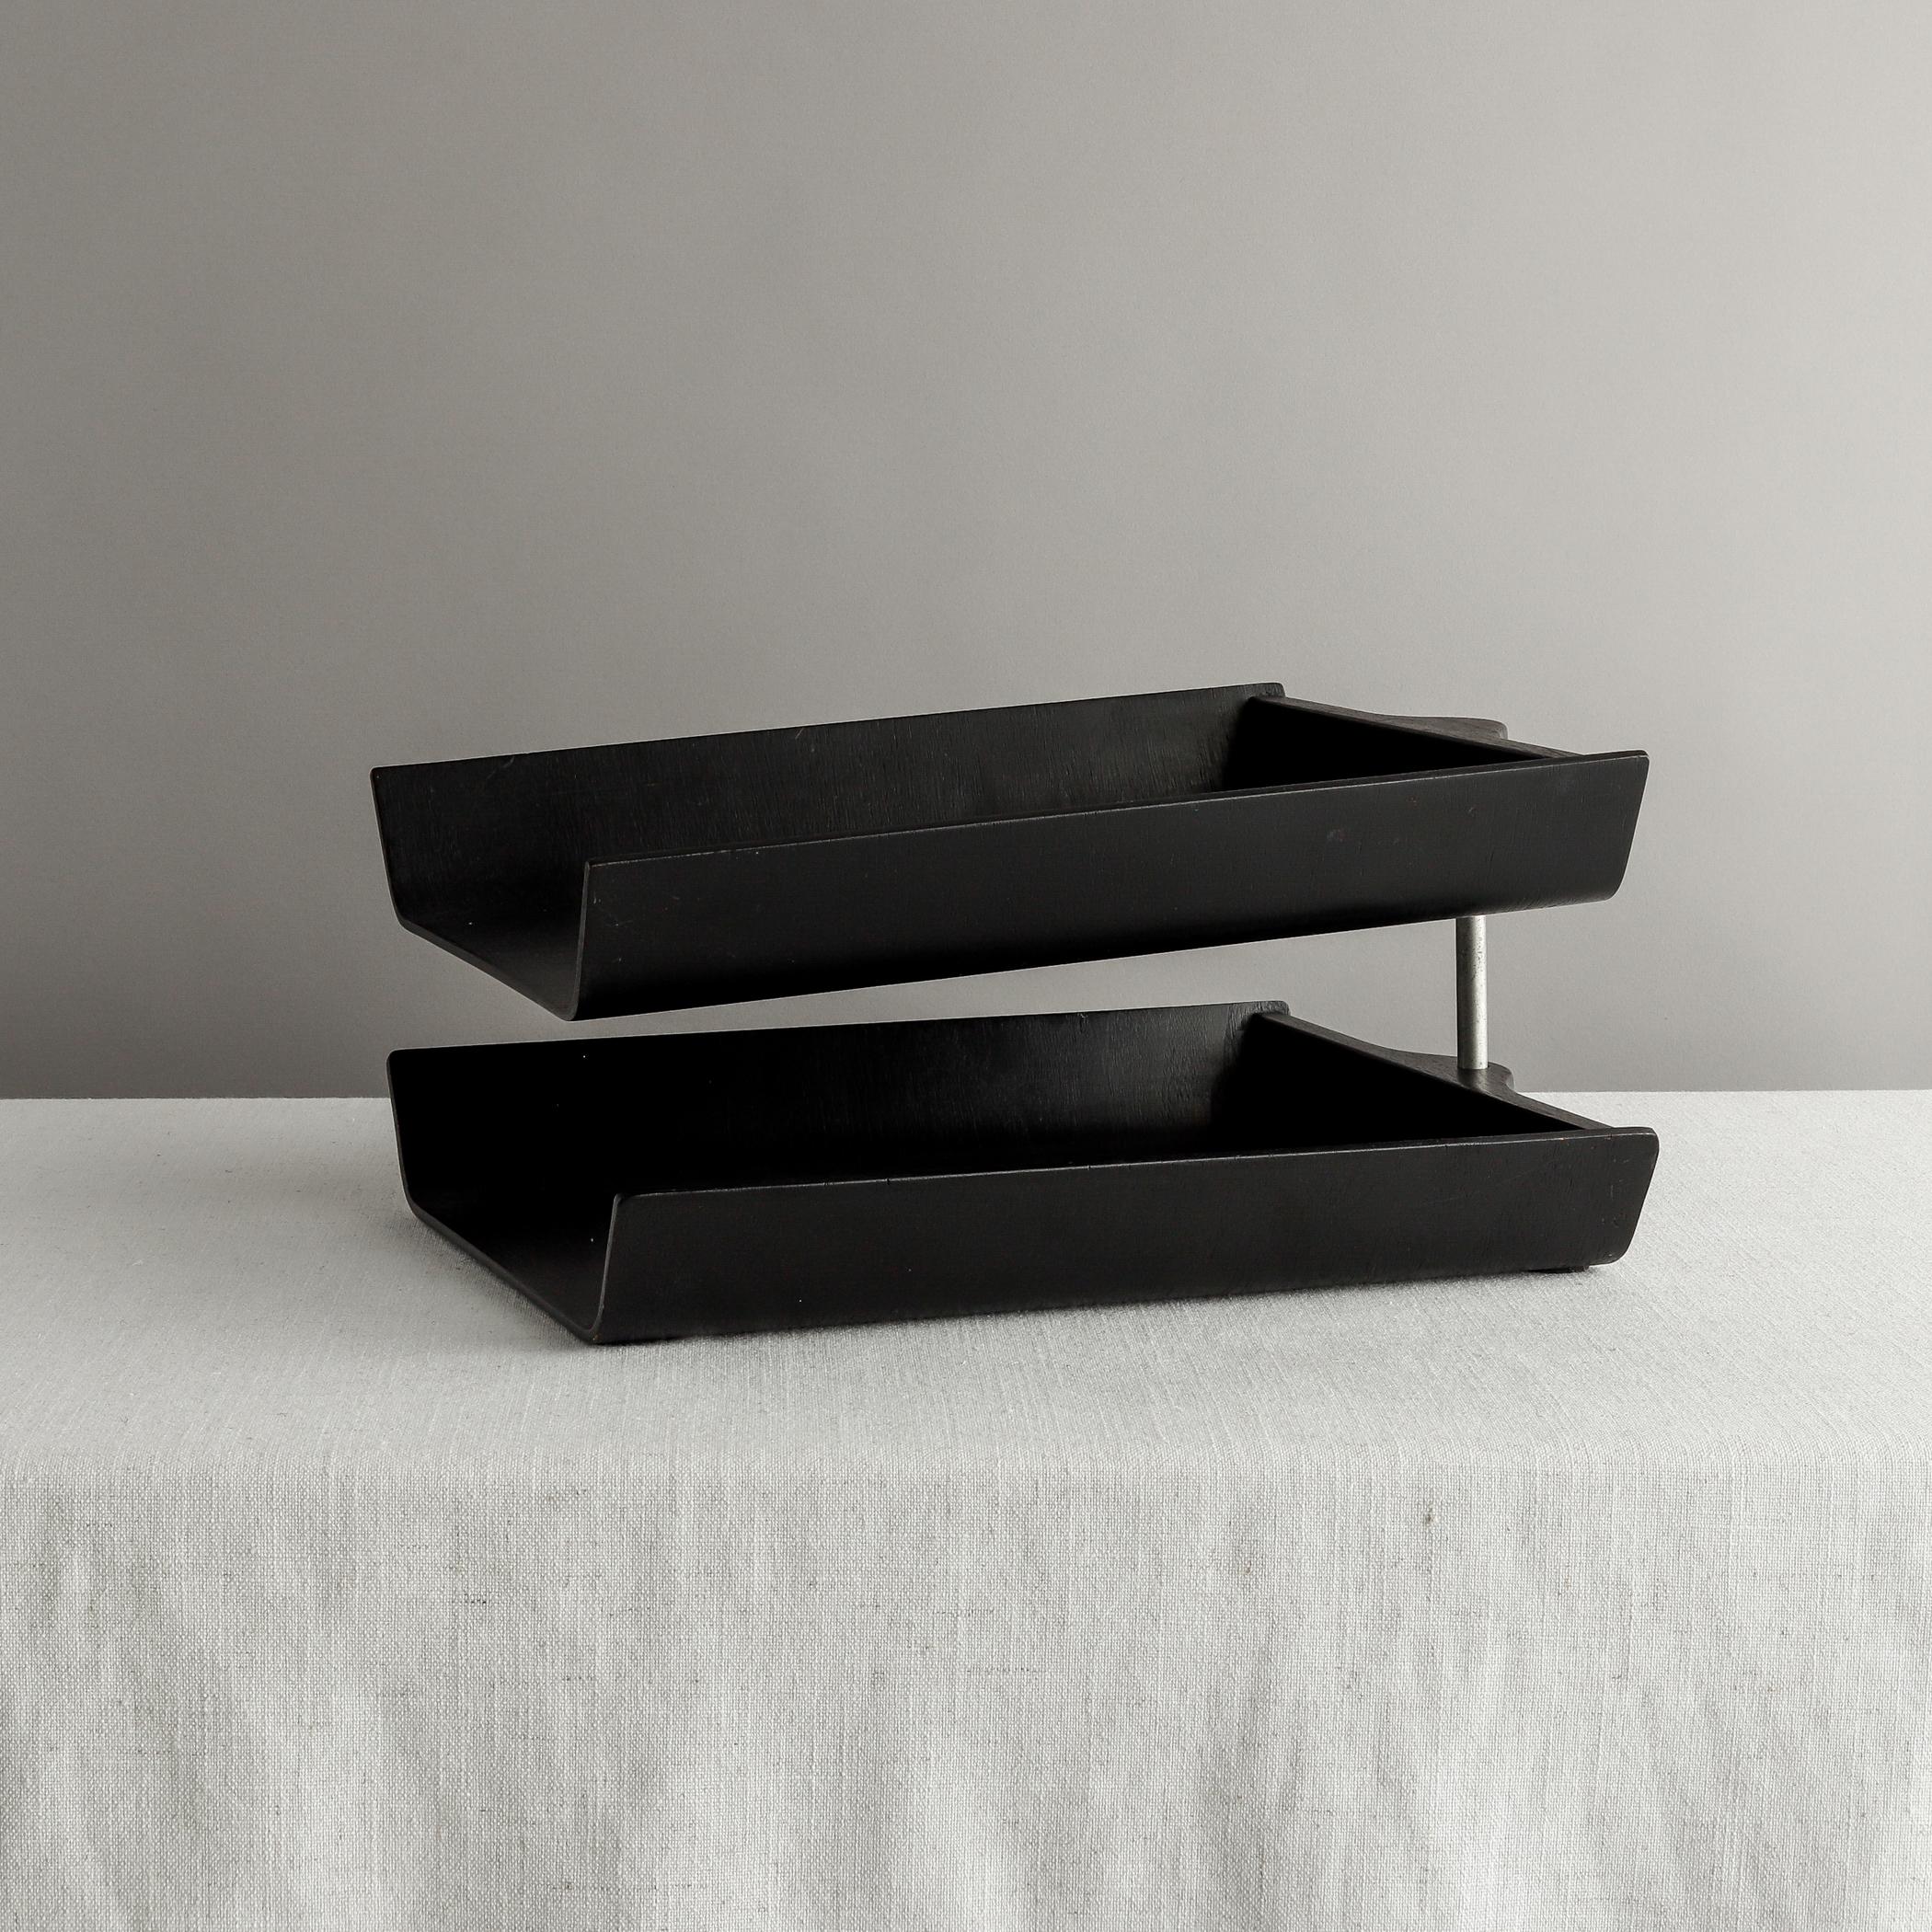 Designed by Florence Knoll in 1948, this double letter tray is made of ebonized birch plywood and was a staple of mid-century office decor. The underside of one of the two stacked trays bears Knoll label with 320 Park Avenue address, indicating